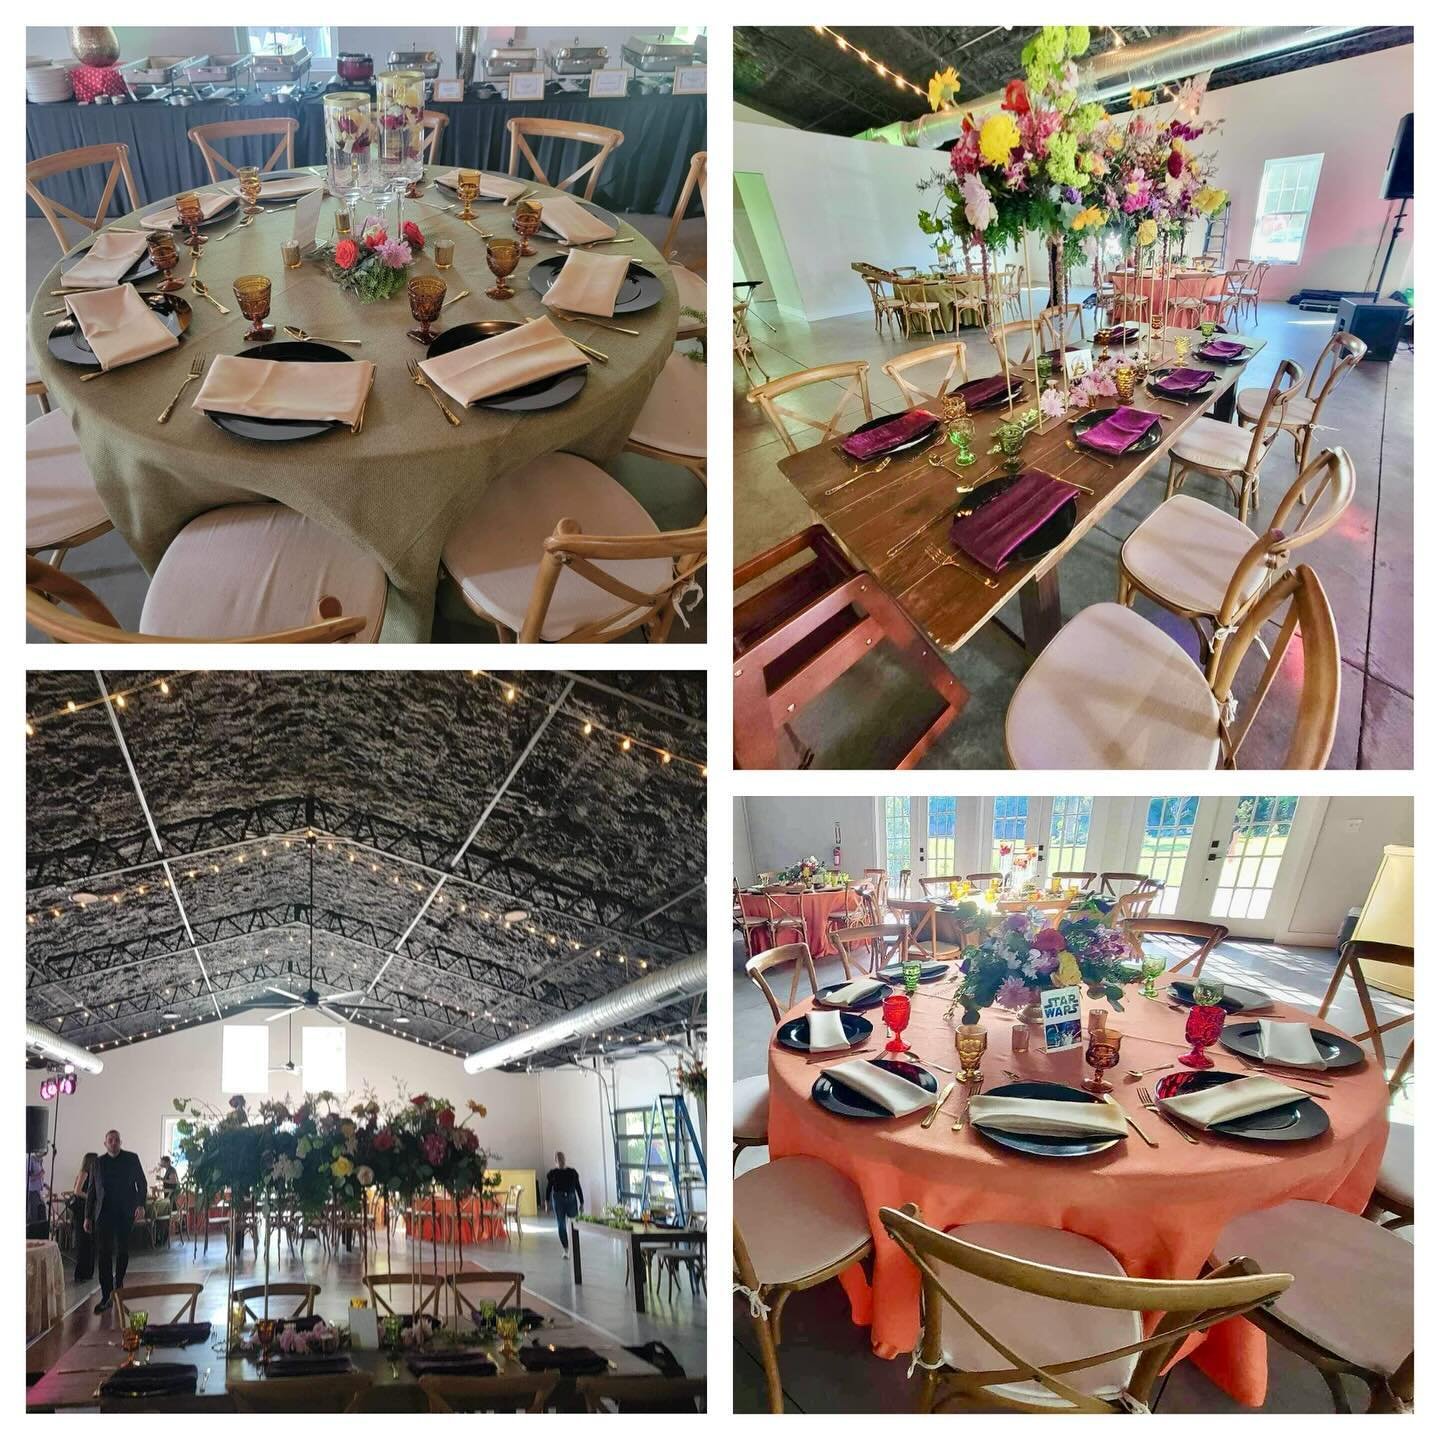 Recent wedding at Paradise Springs. We provided all the Tables, Wood Crossback Chairs, Market Lighting, Plateware, Glassware (including our Mix-Matched Vintage Goblets), Gold Utensils, &amp; Black Chargers. &mdash;&mdash;&mdash;&mdash;&mdash;&mdash;&